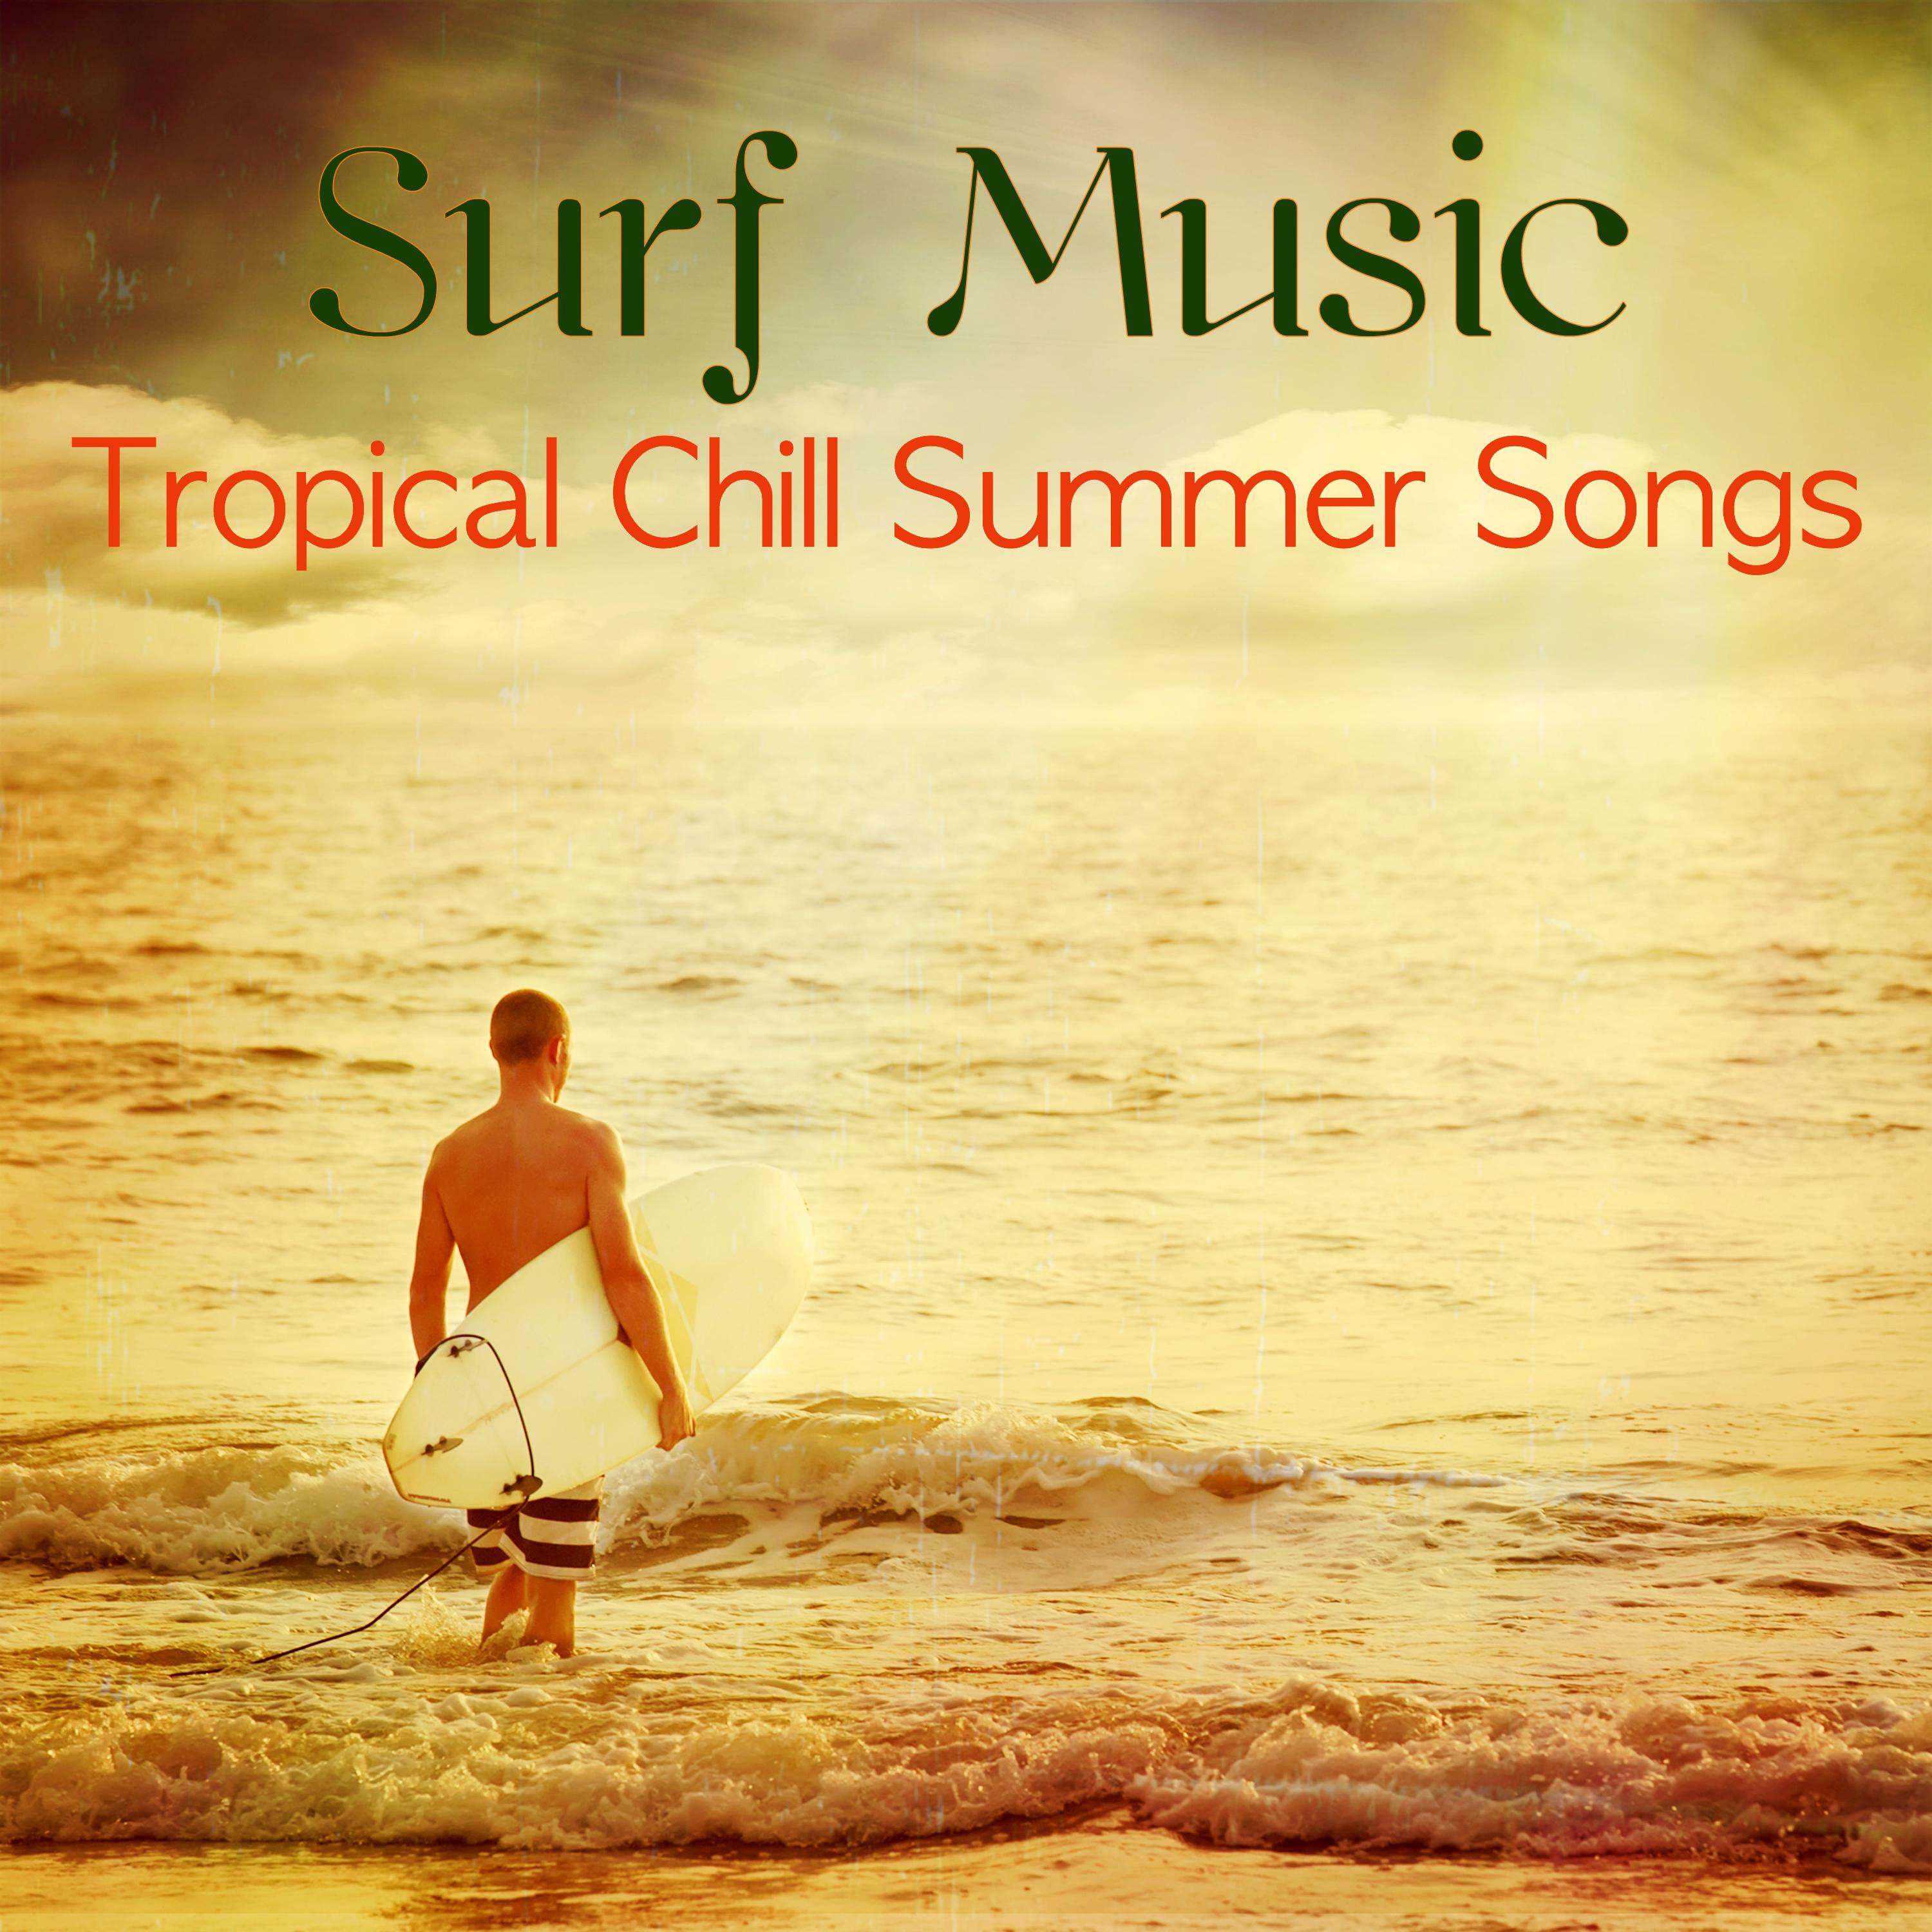 Surf Music - Into the Nature